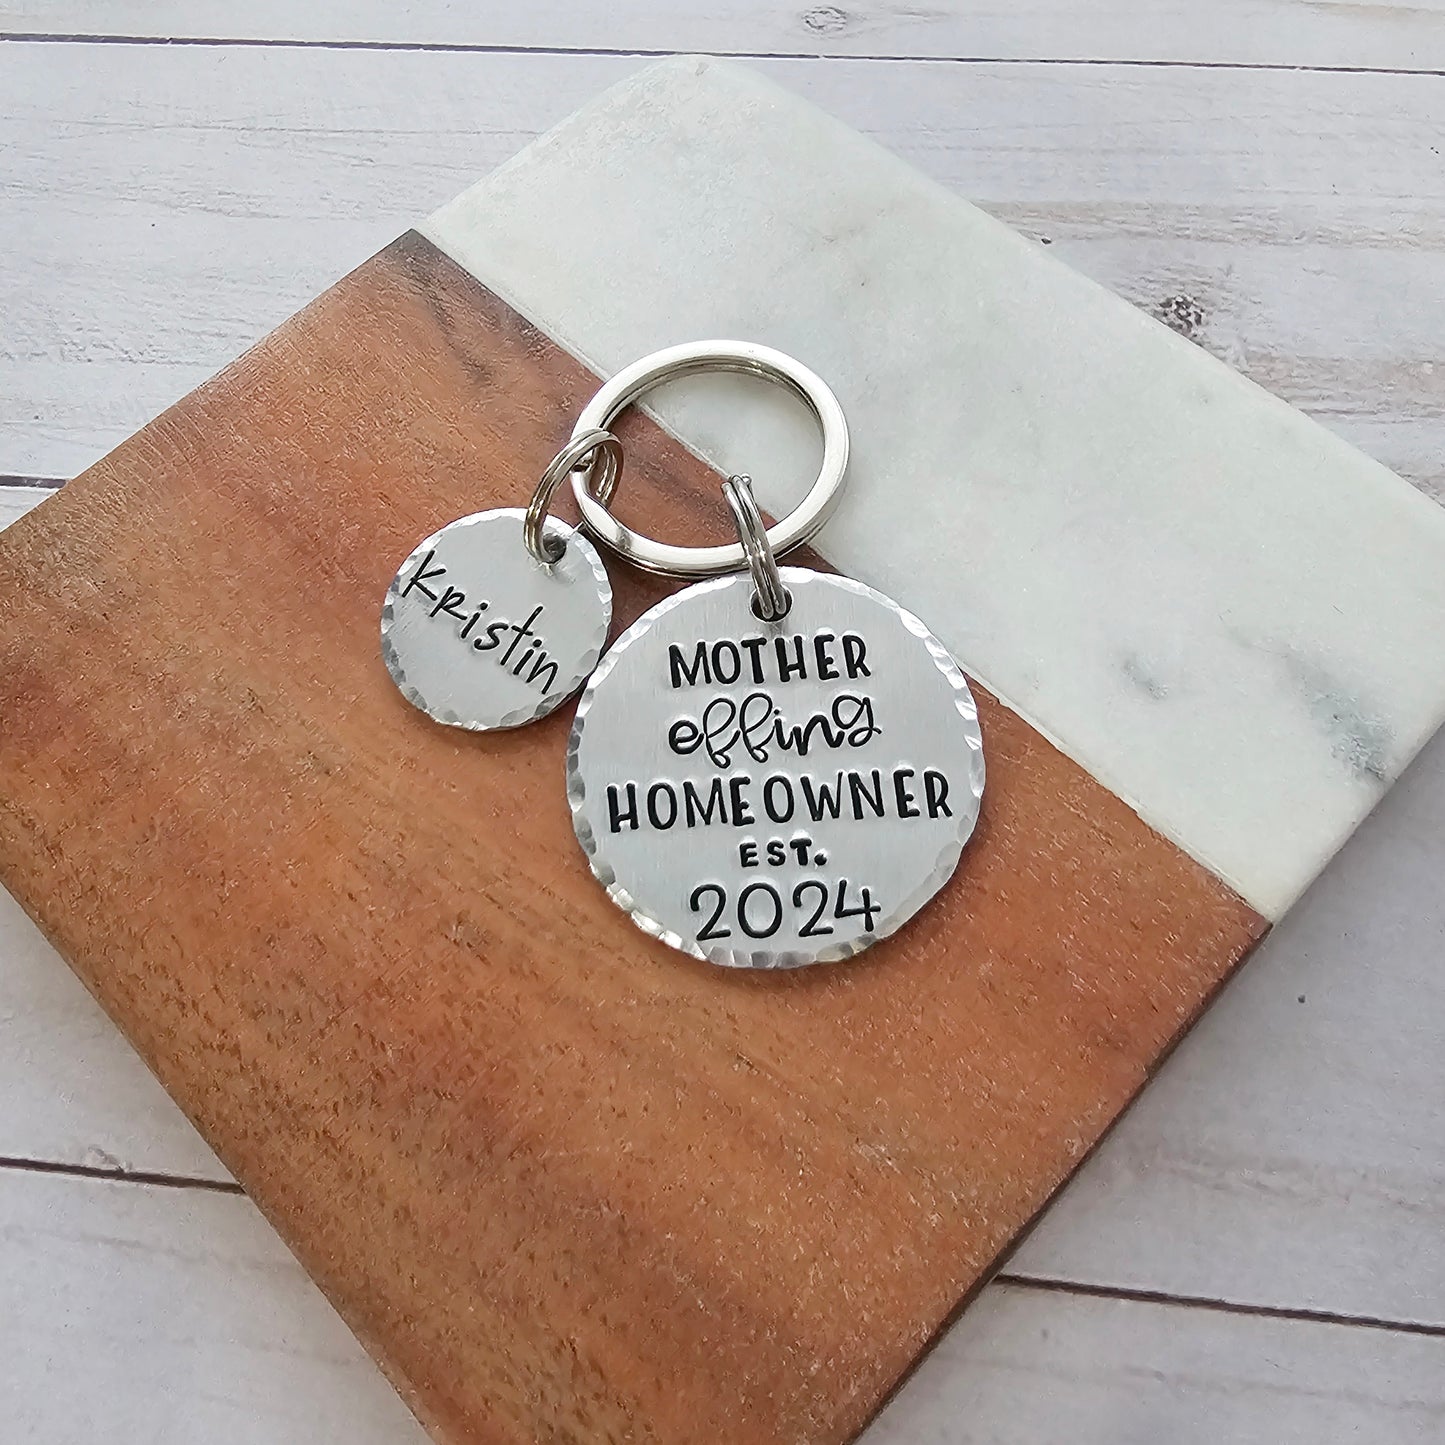 Mother Effing Homeowner Key Chain with Year Est, Funny Housewarming Gift for Women, First House Accessories, Closing Gift for Home Buyer